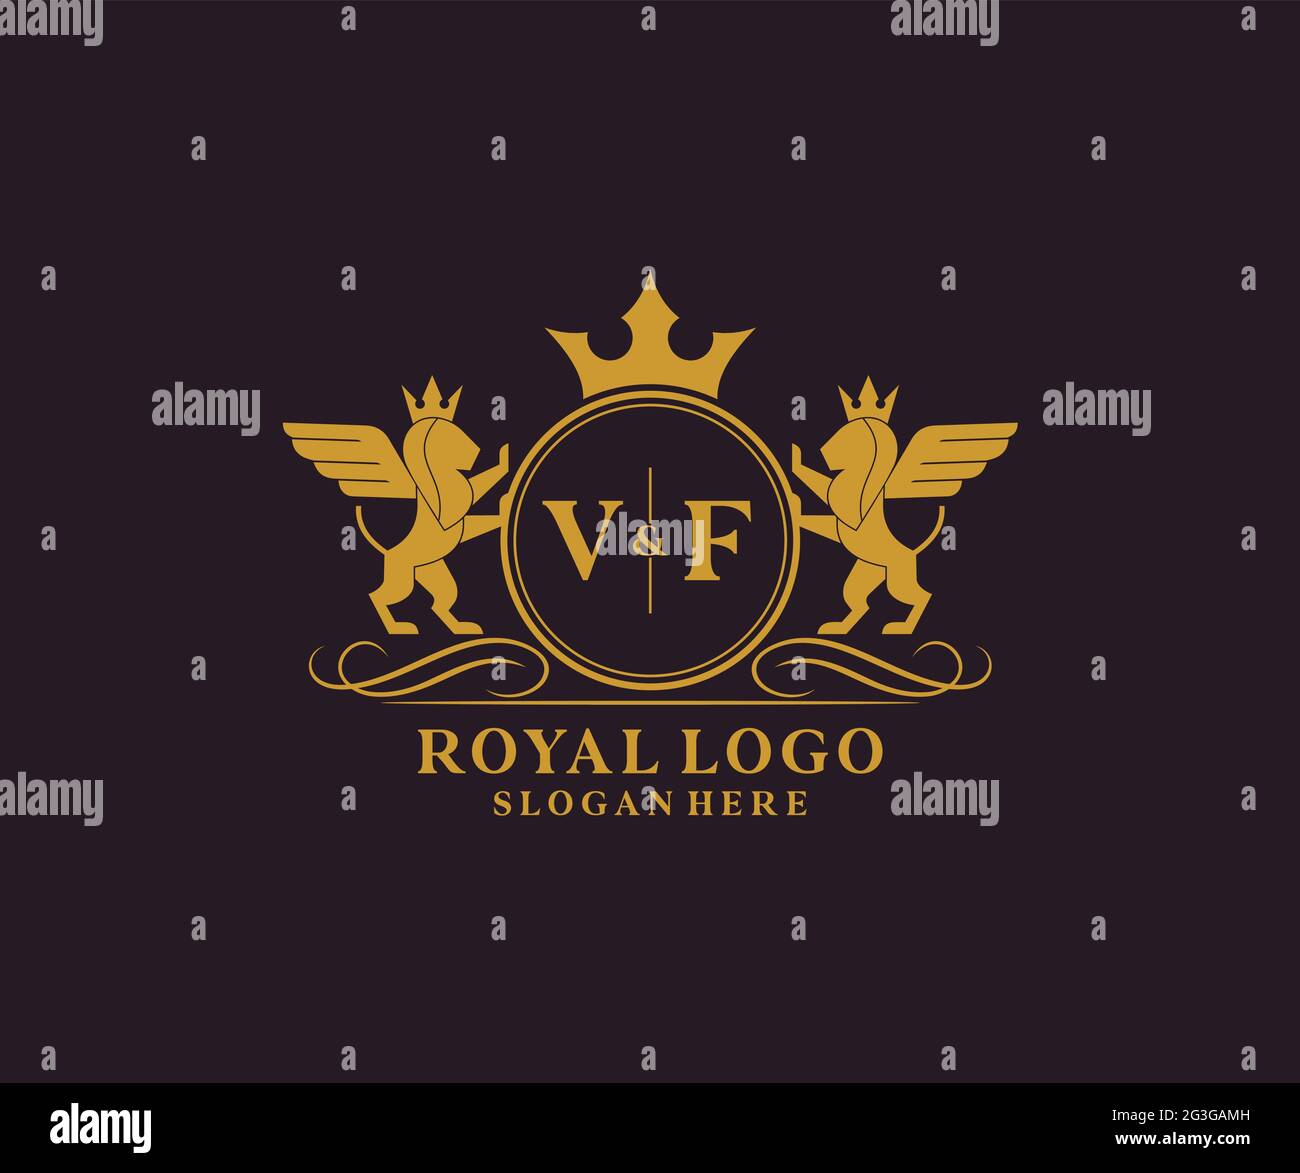 VF Letter Lion Royal Luxury Heraldic,Crest Logo template in vector art for Restaurant, Royalty, Boutique, Cafe, Hotel, Heraldic, Jewelry, Fashion and Stock Vector